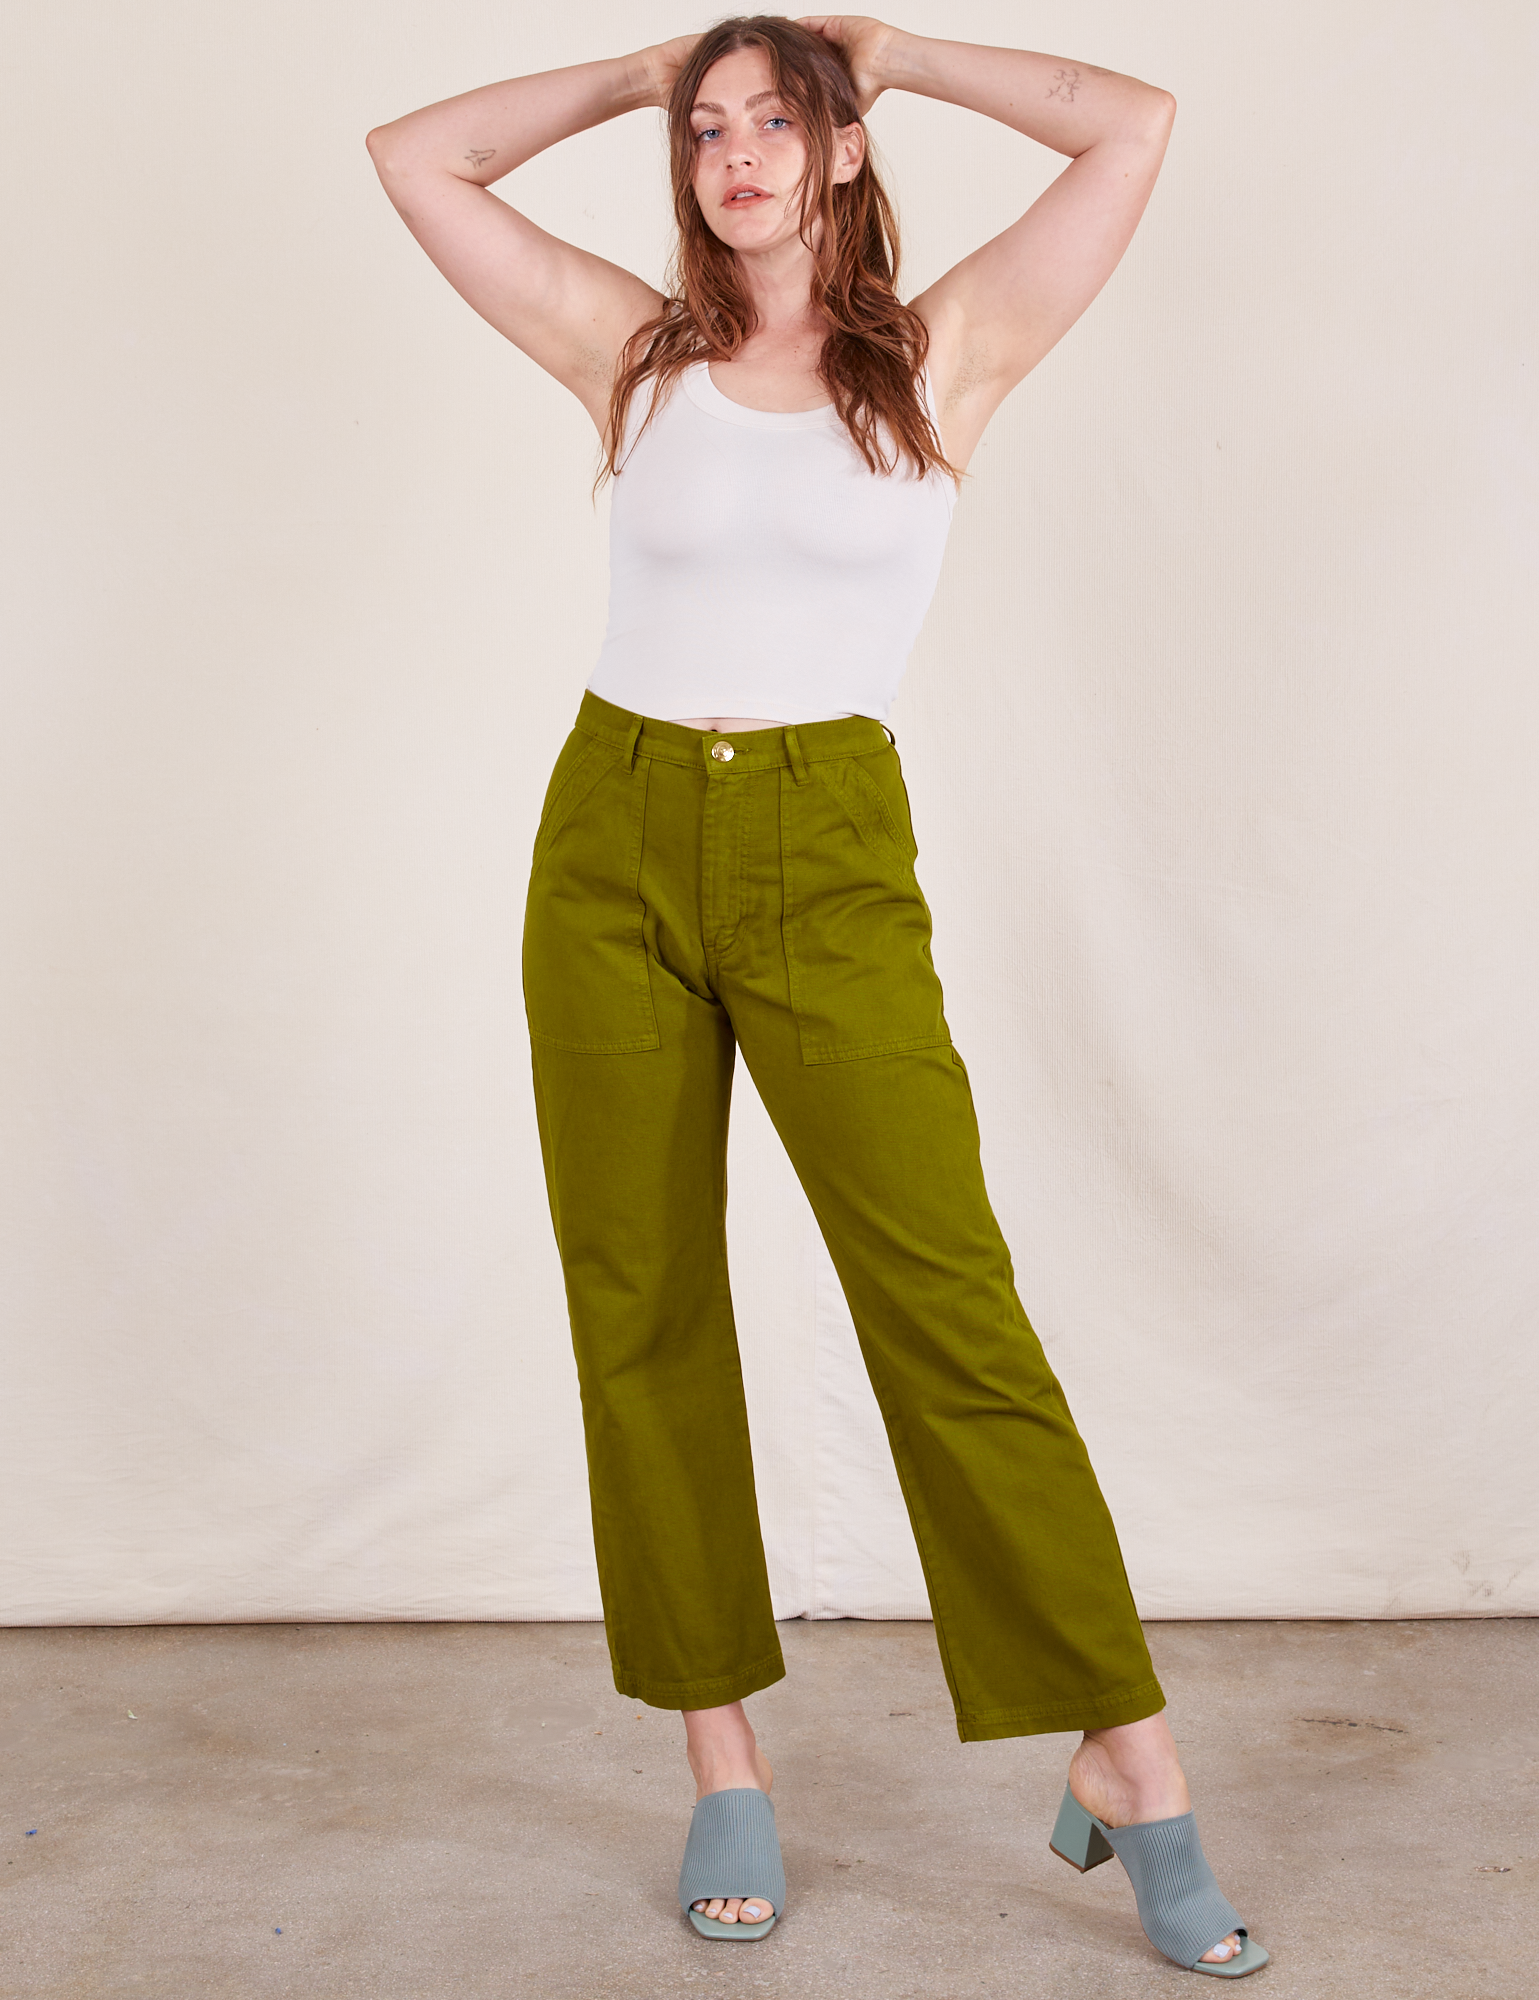 Allison is wearing Work Pants in Olive Green and vintage off-white Tank Top